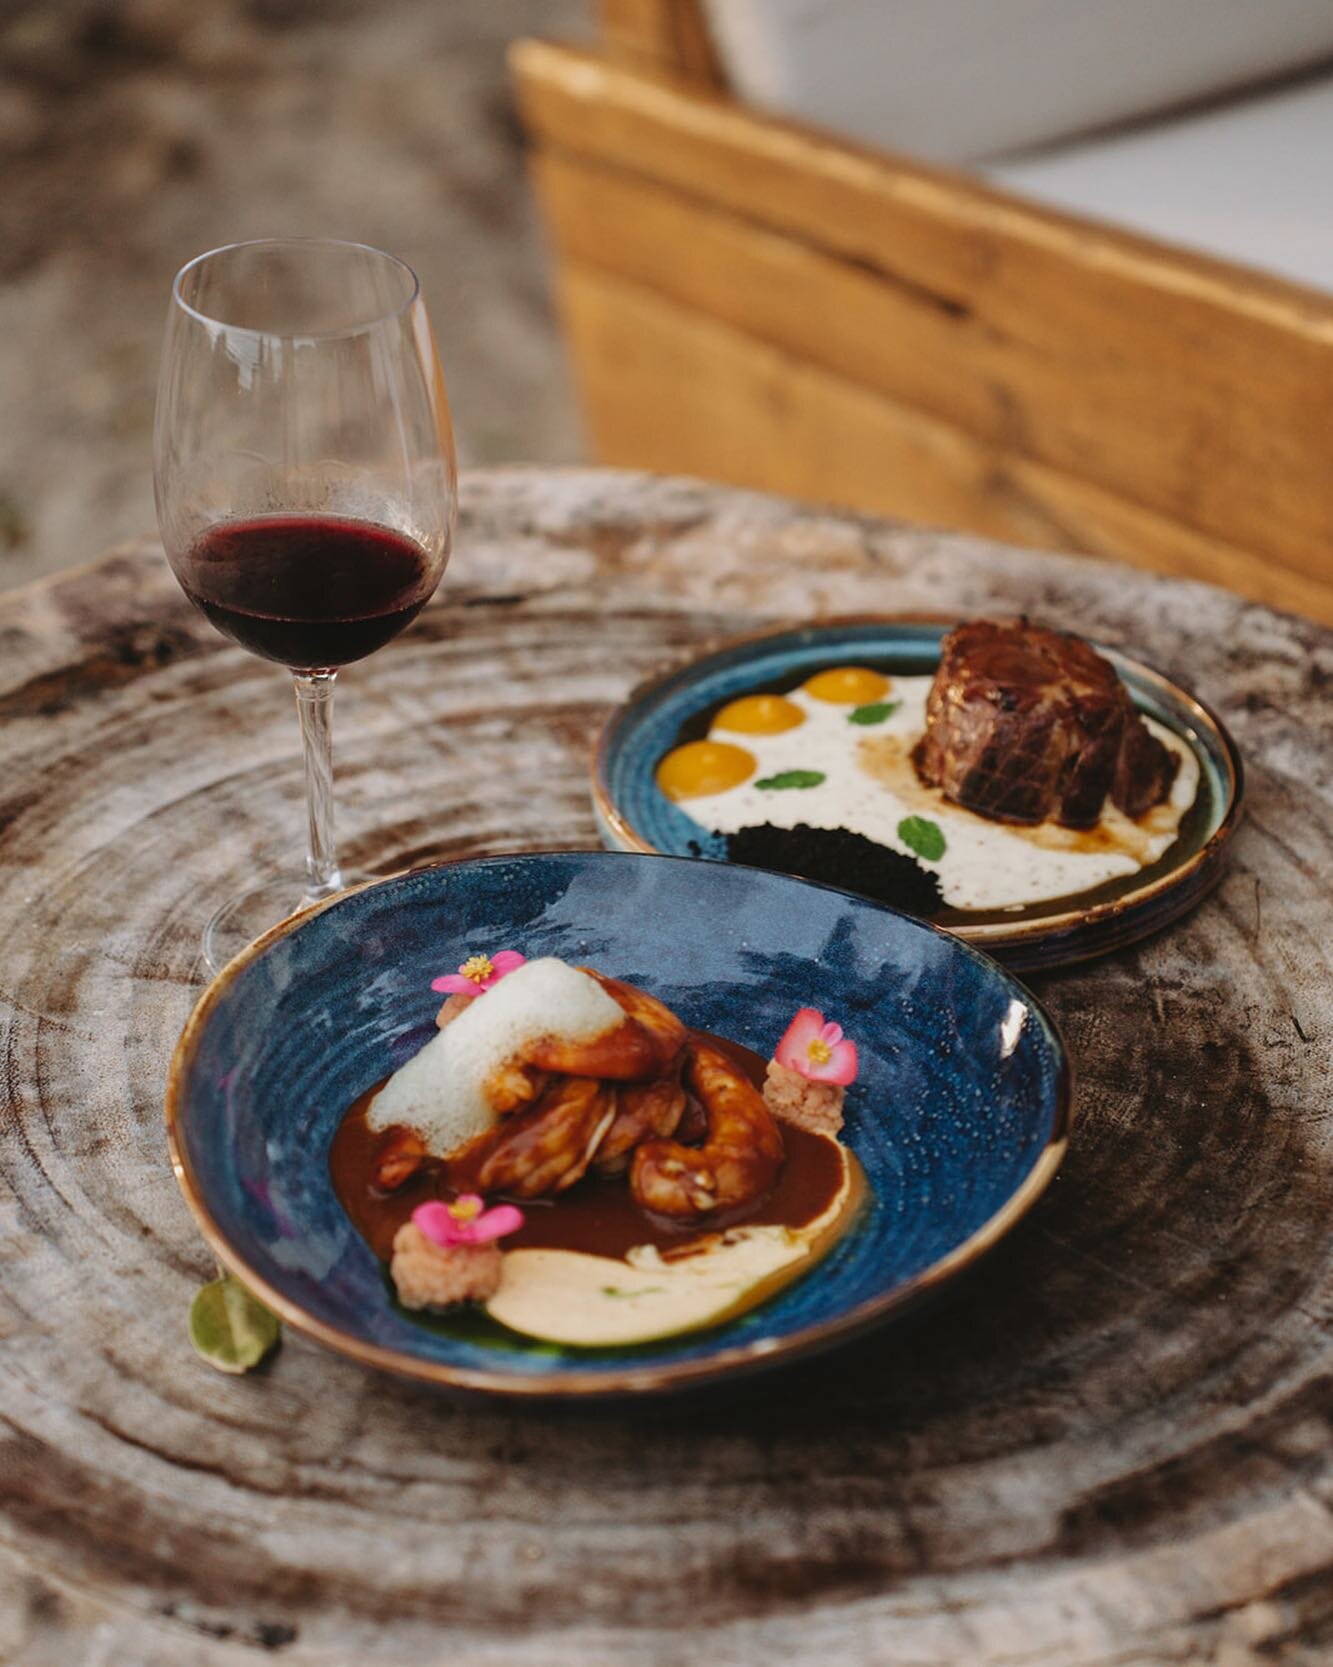 Our new menu includes mouth-watering delights such as Lamb Shoulder and Shrimp Suquet made by our chef Pepe! Join us for a wonderful evening in our #puravida paradise